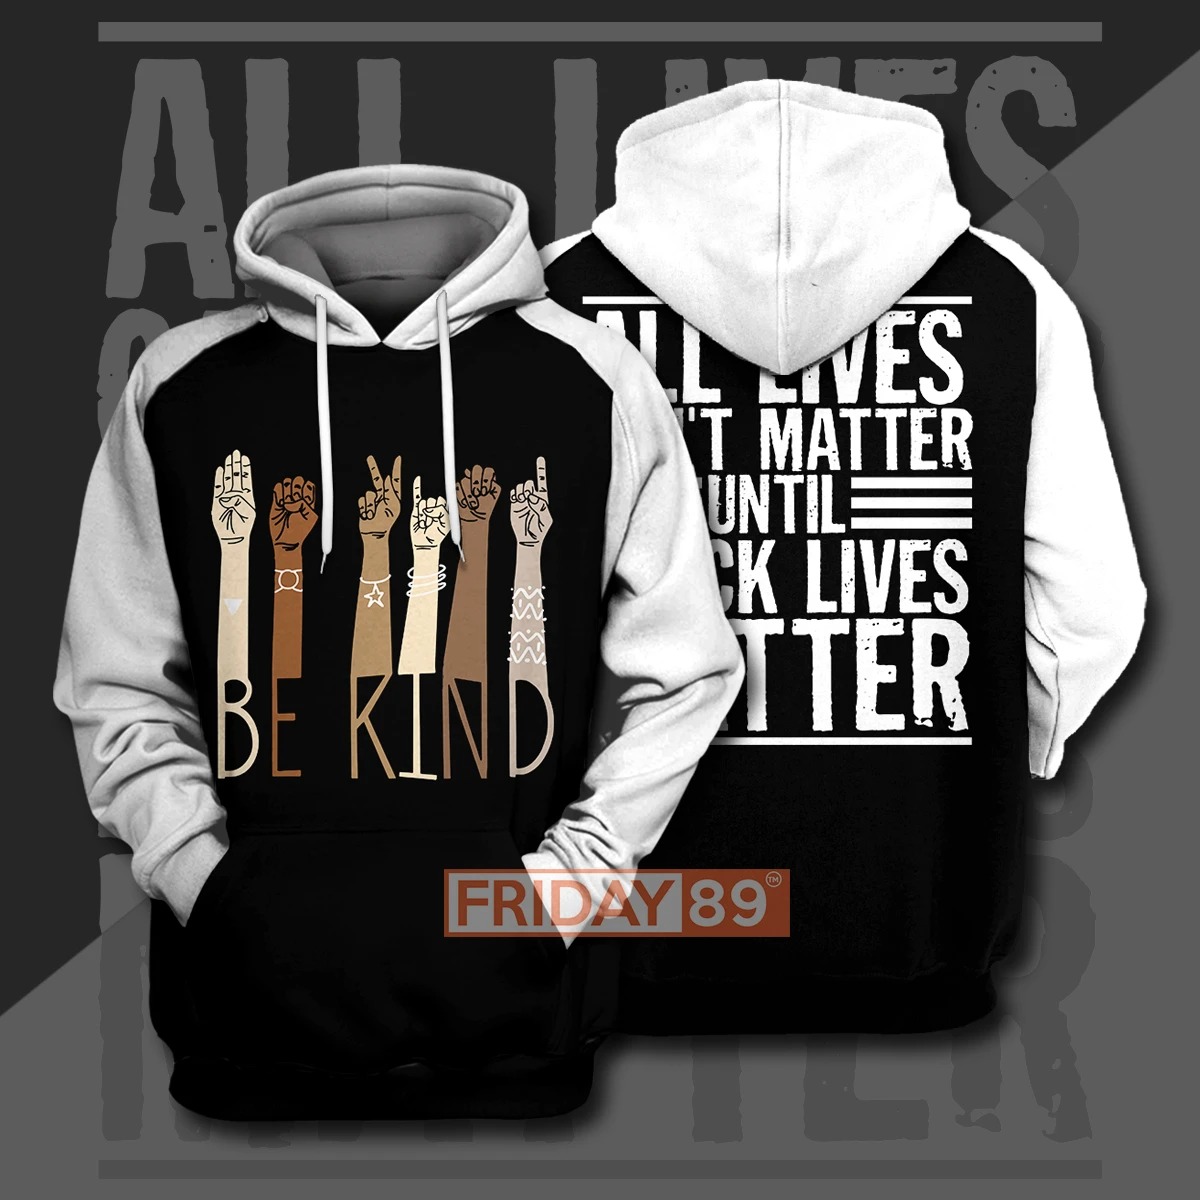 Be kind all lives cant matter until 3d print hoodie